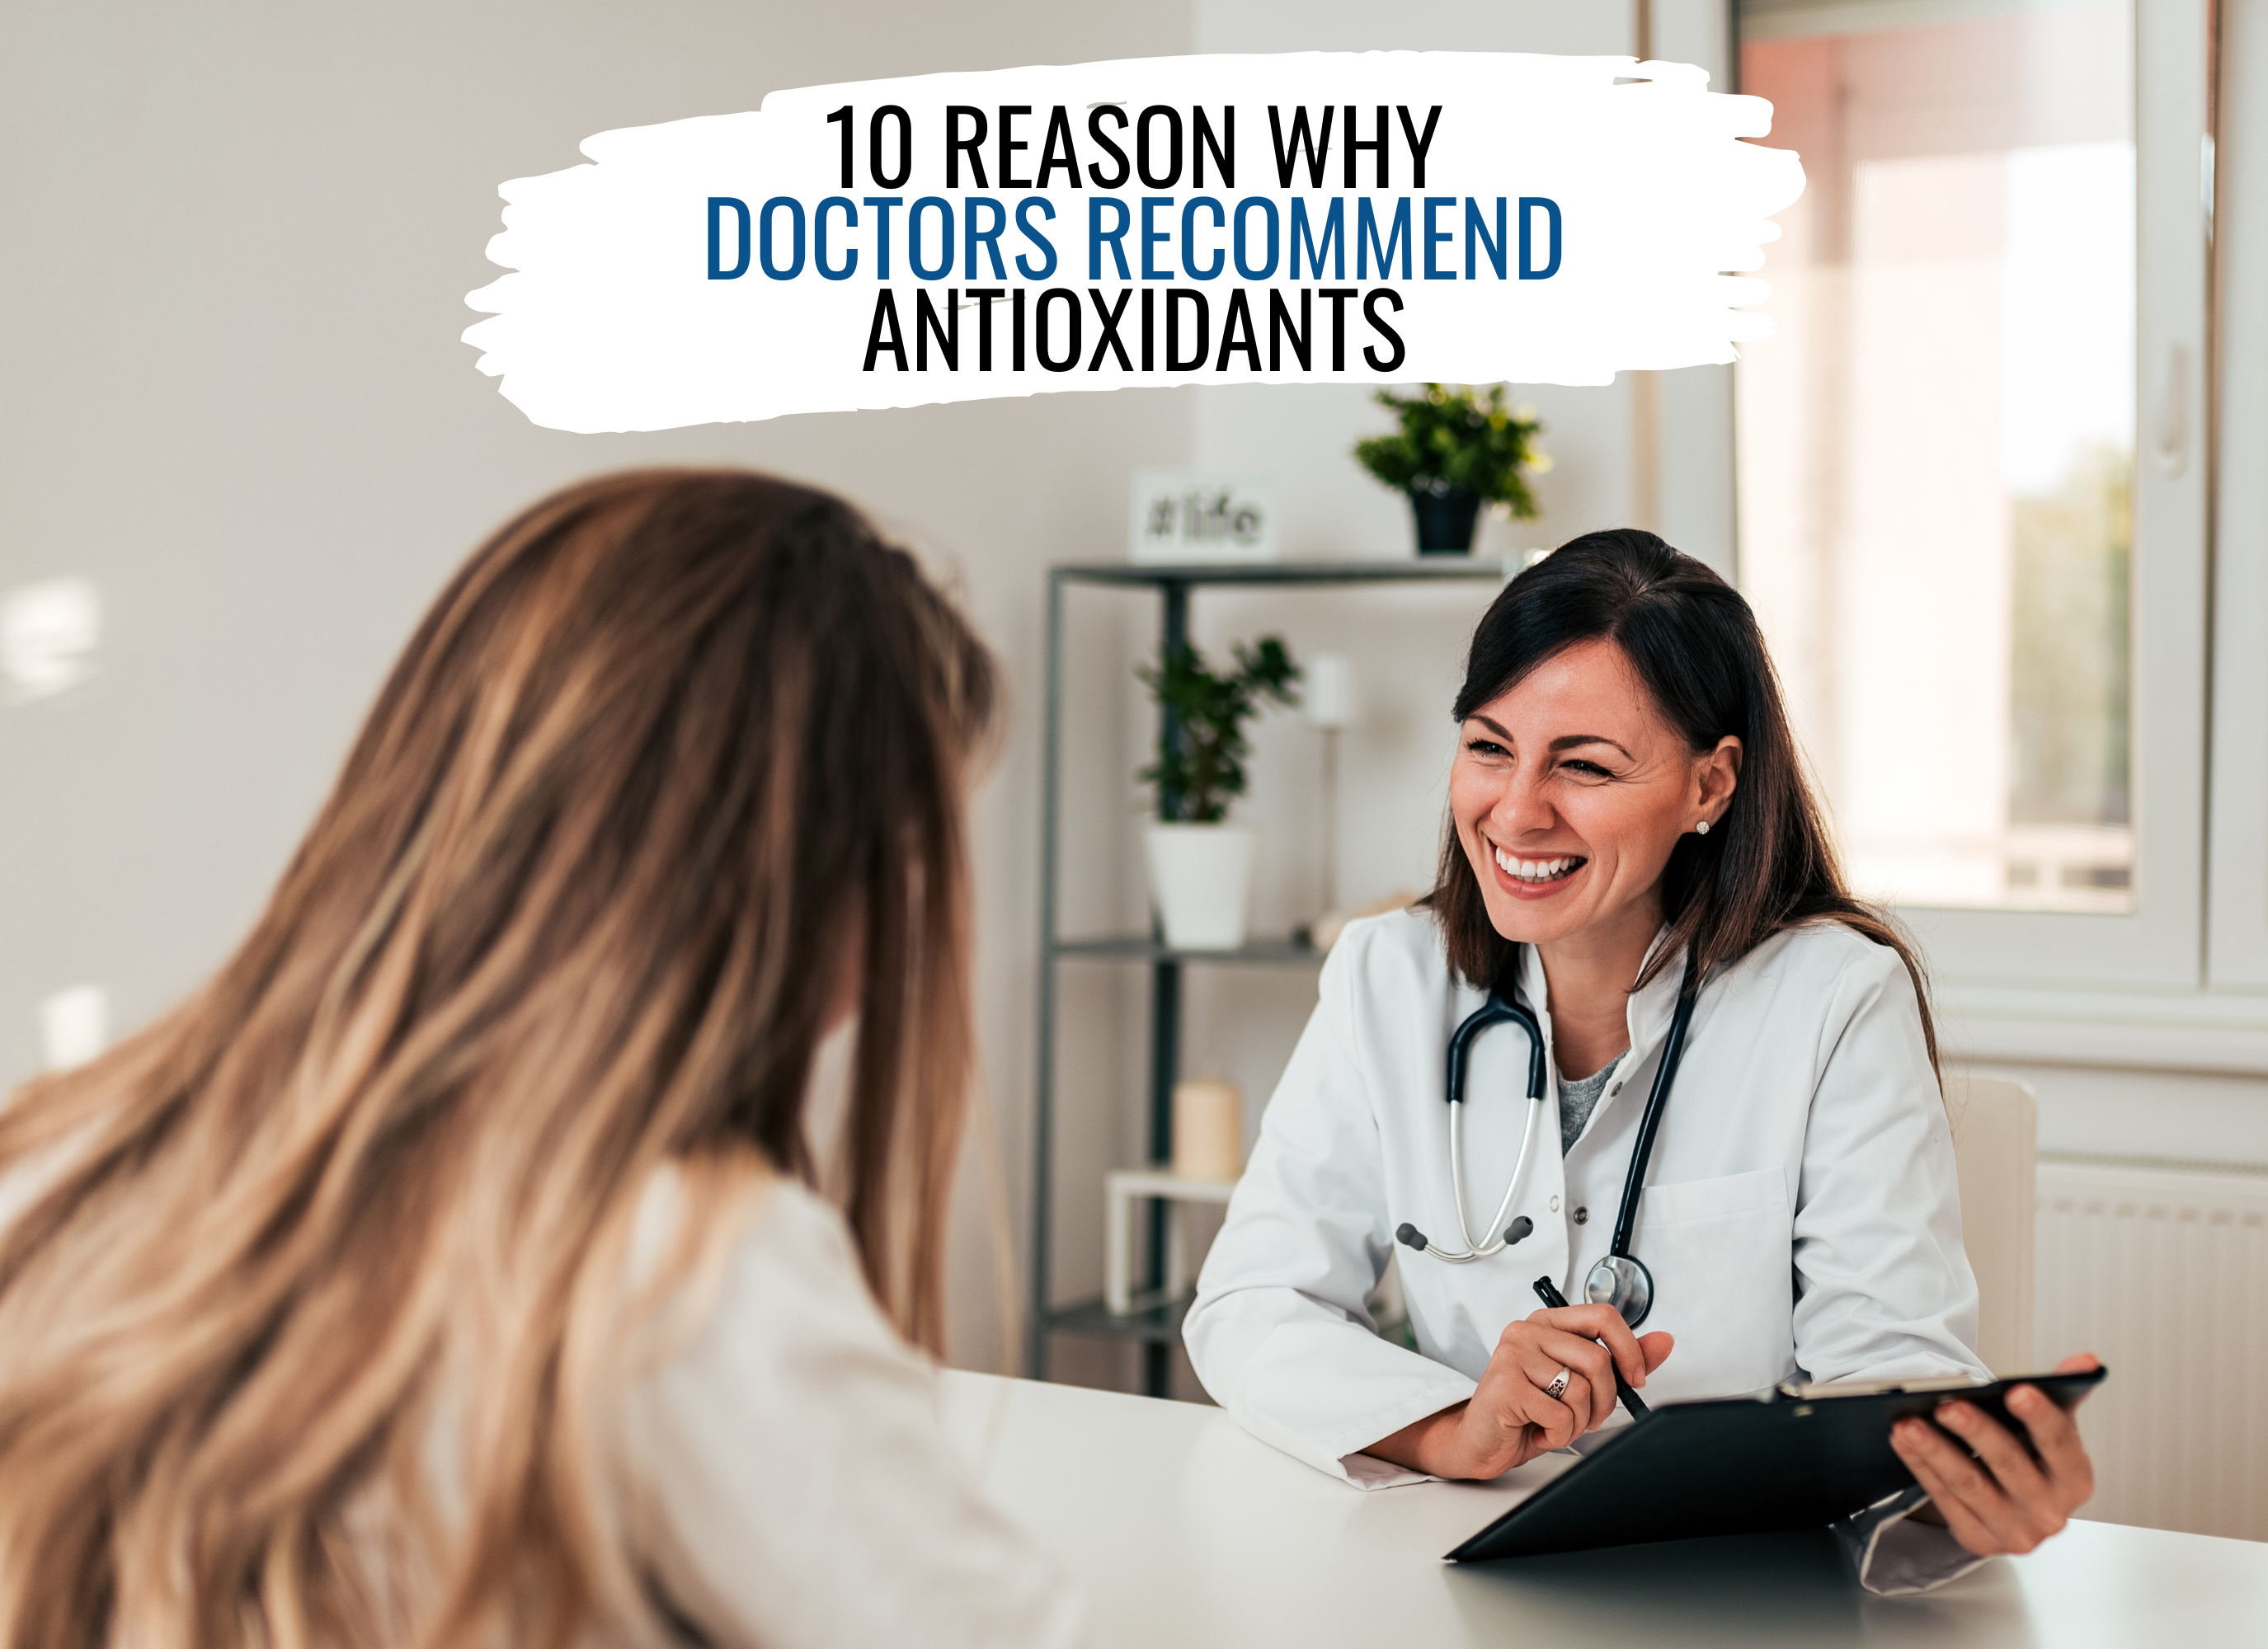 10 Reasons Why Doctors Recommend Antioxidants!